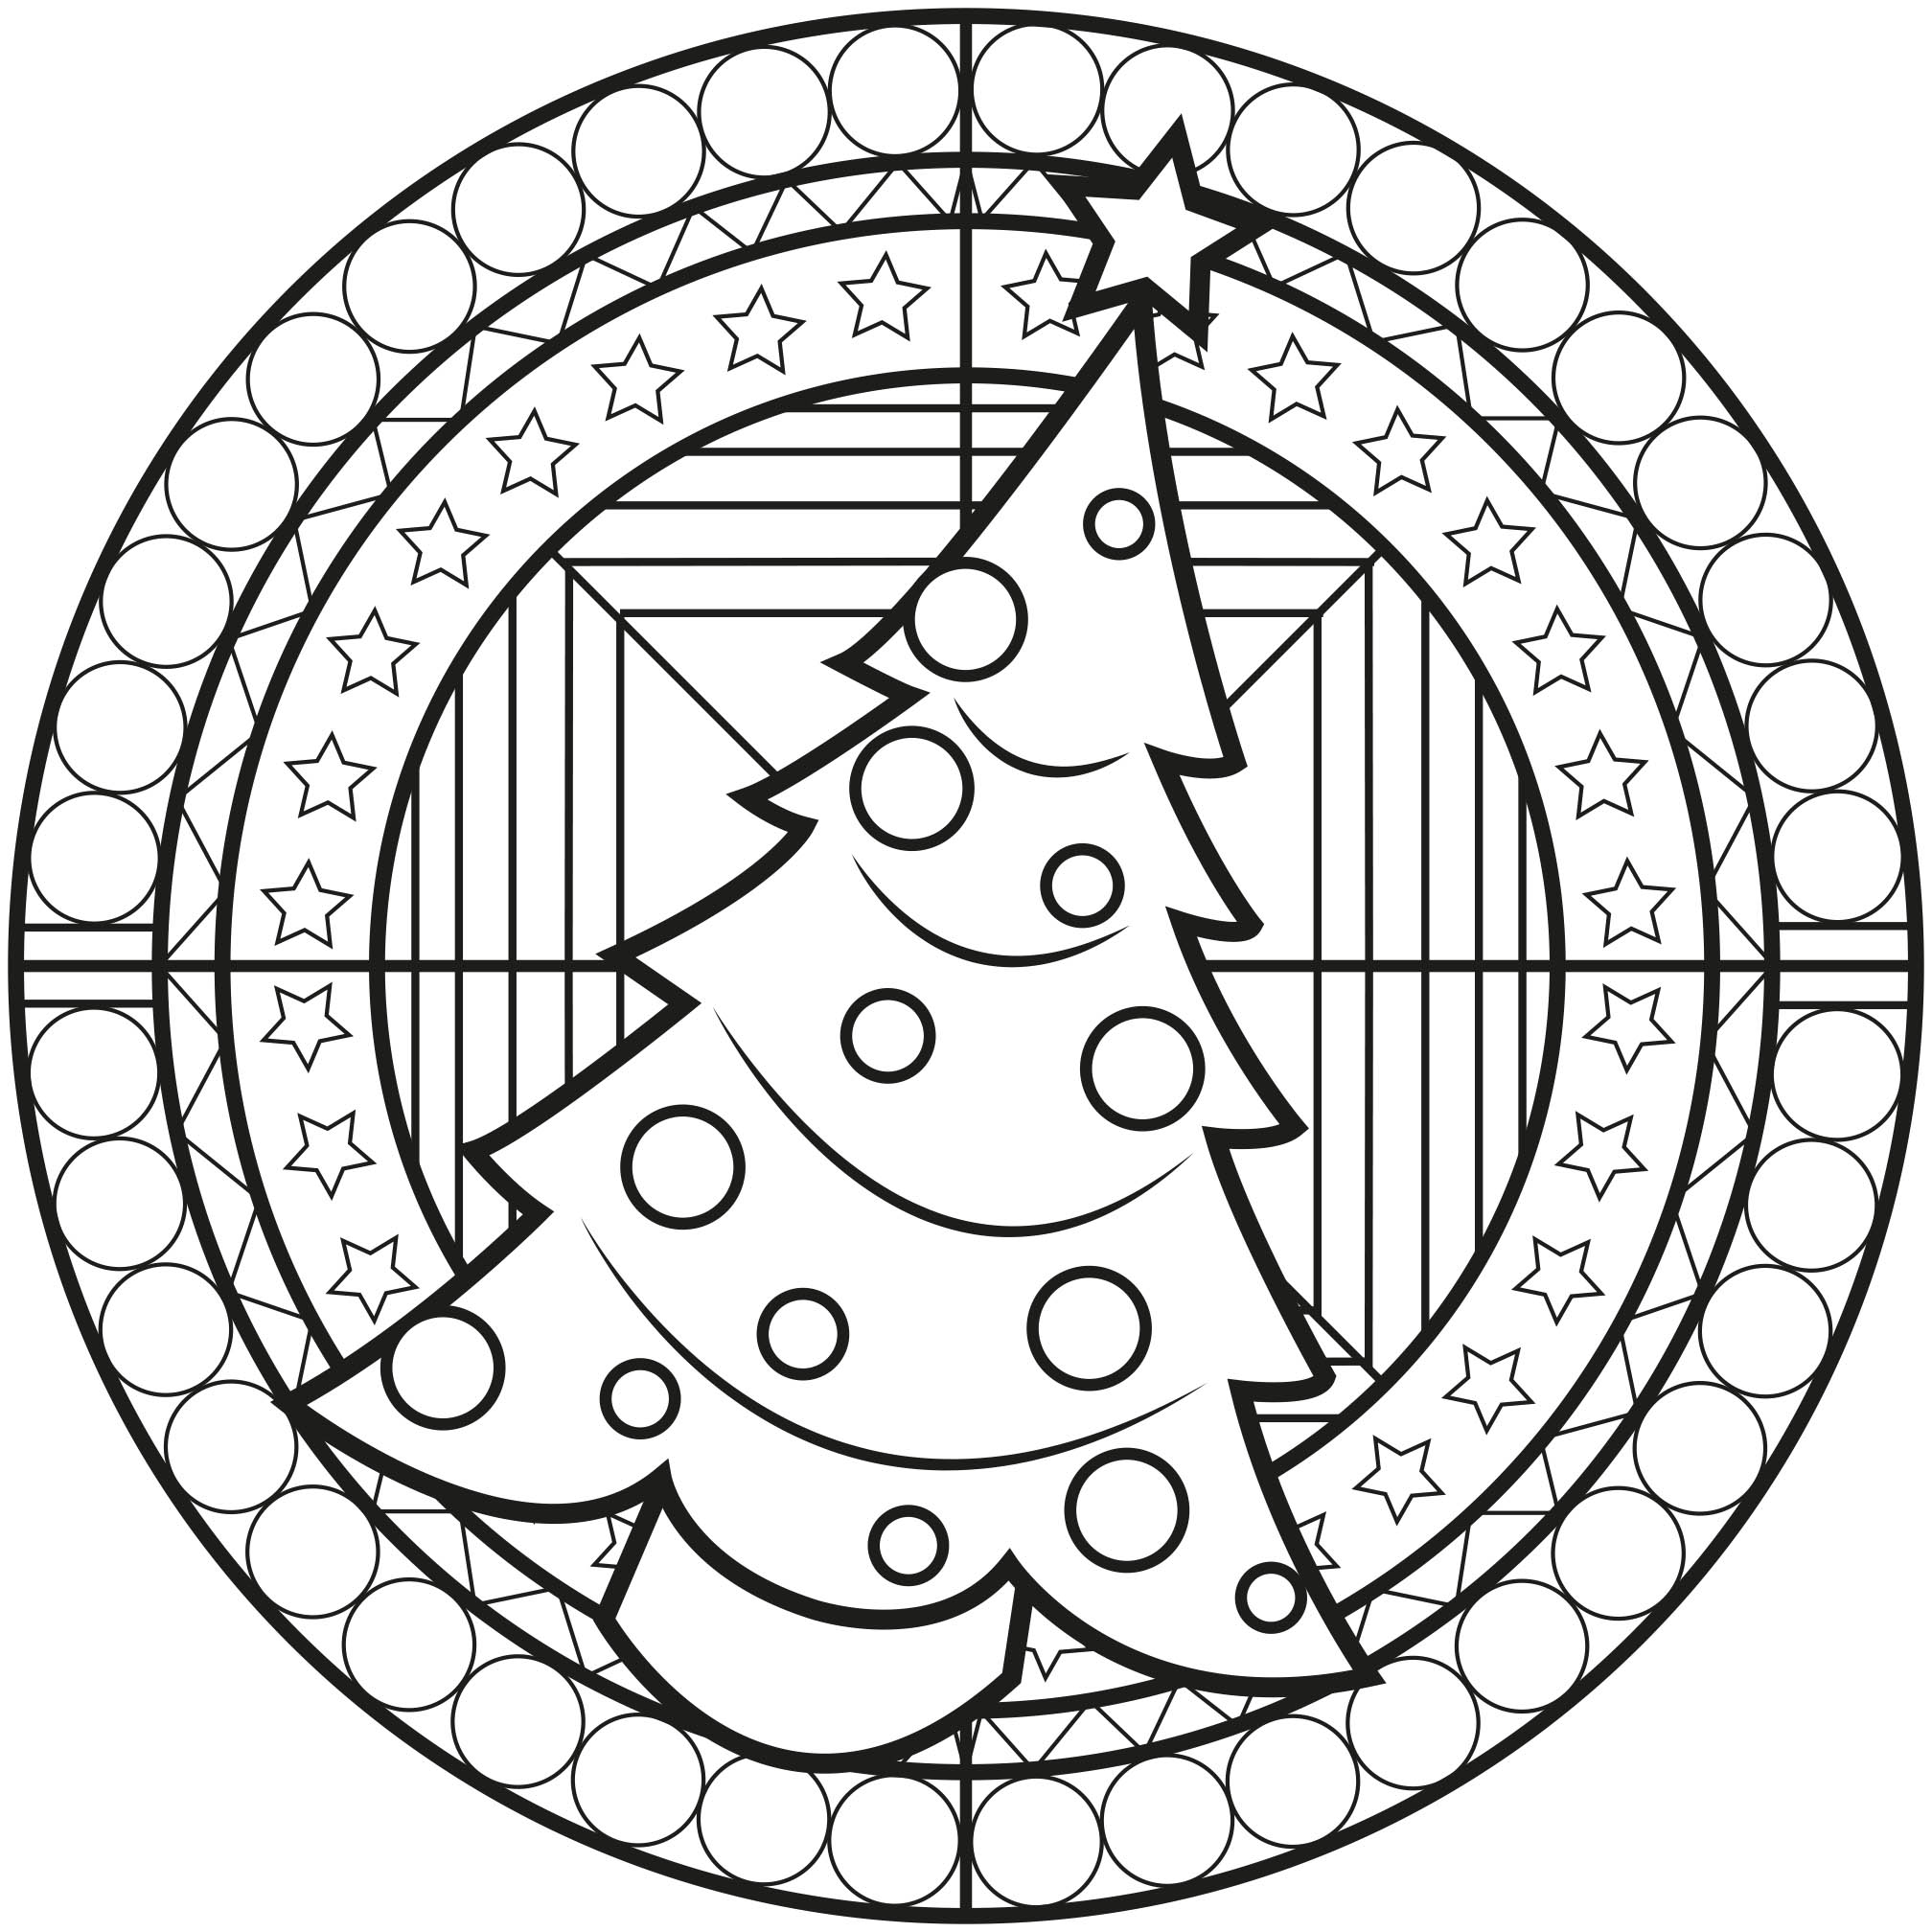 Christmas is coming ! Get in the ambience with this Christmas mandala containing a big Christmas Tree in the middle, Artist : Allan